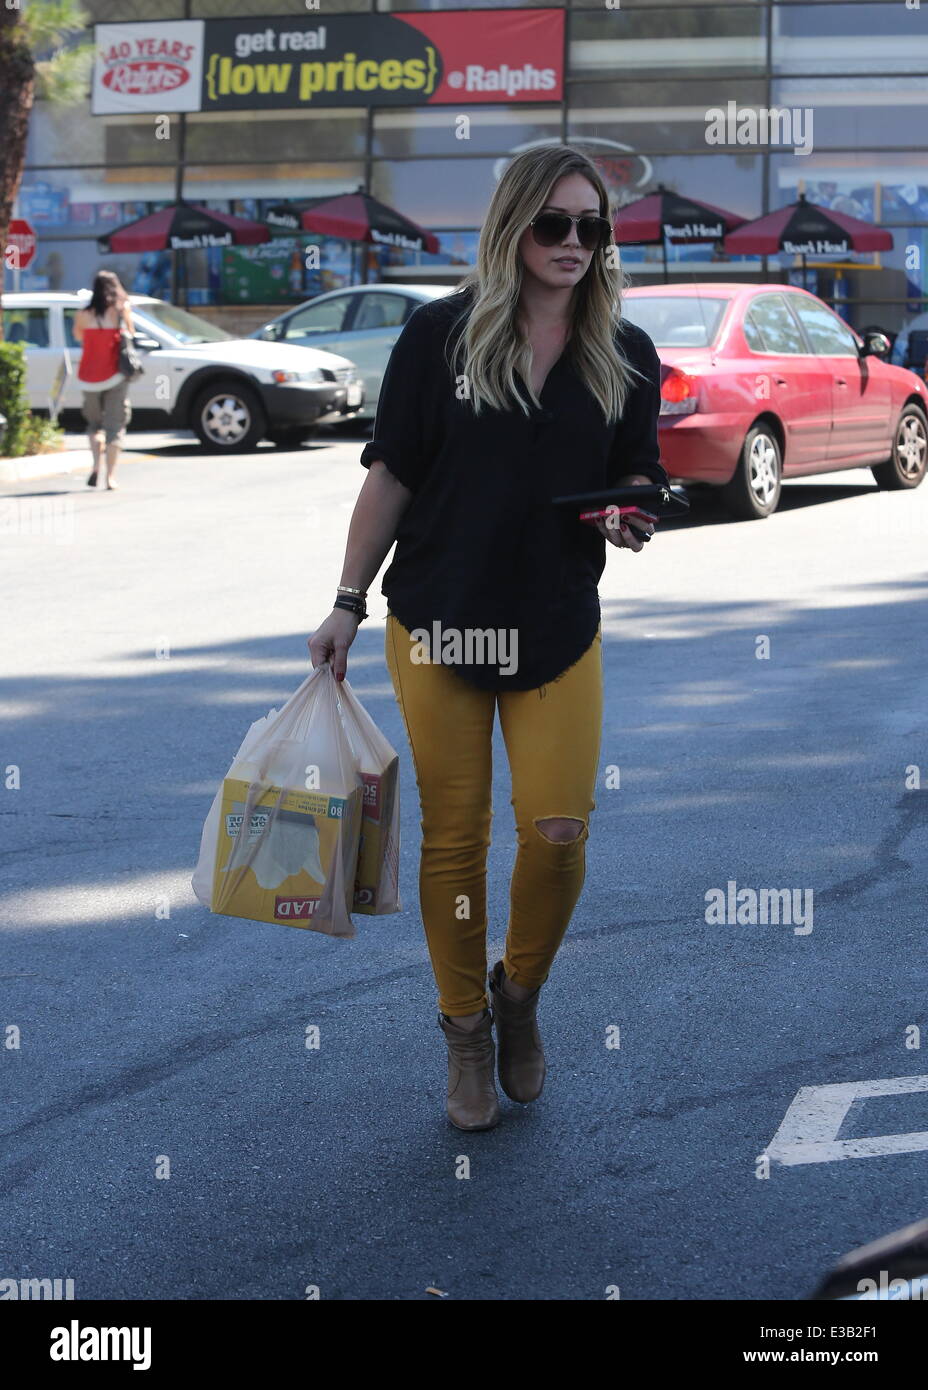 https://c8.alamy.com/comp/E3B2F1/hilary-duff-out-shopping-in-ripped-yellow-jeans-buying-glad-quick-E3B2F1.jpg